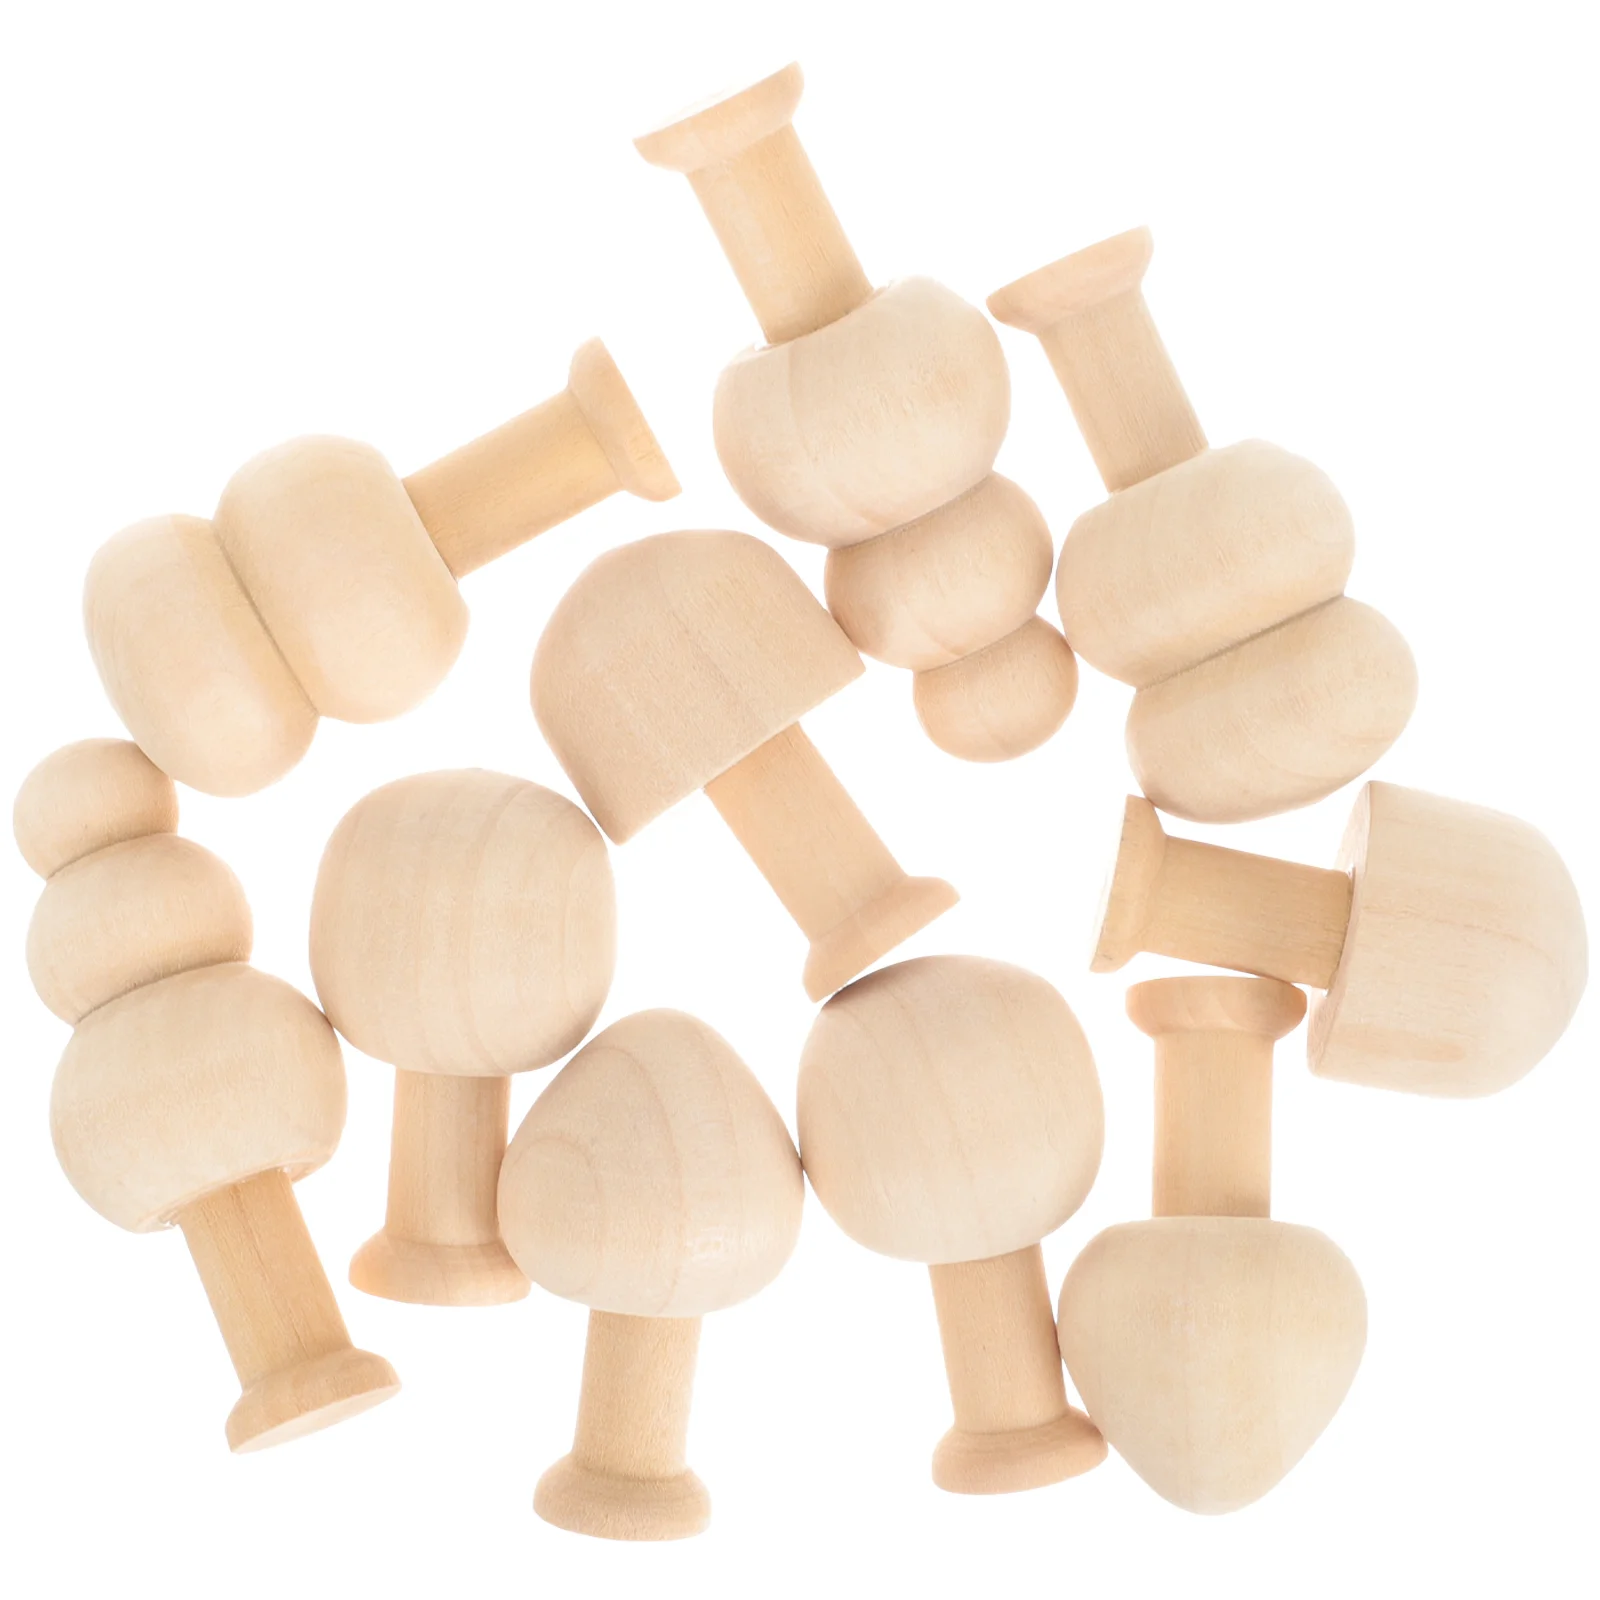 

Small Wooden Mushroom Unpainted Toy Shapes Miniature Light House Decorations Home